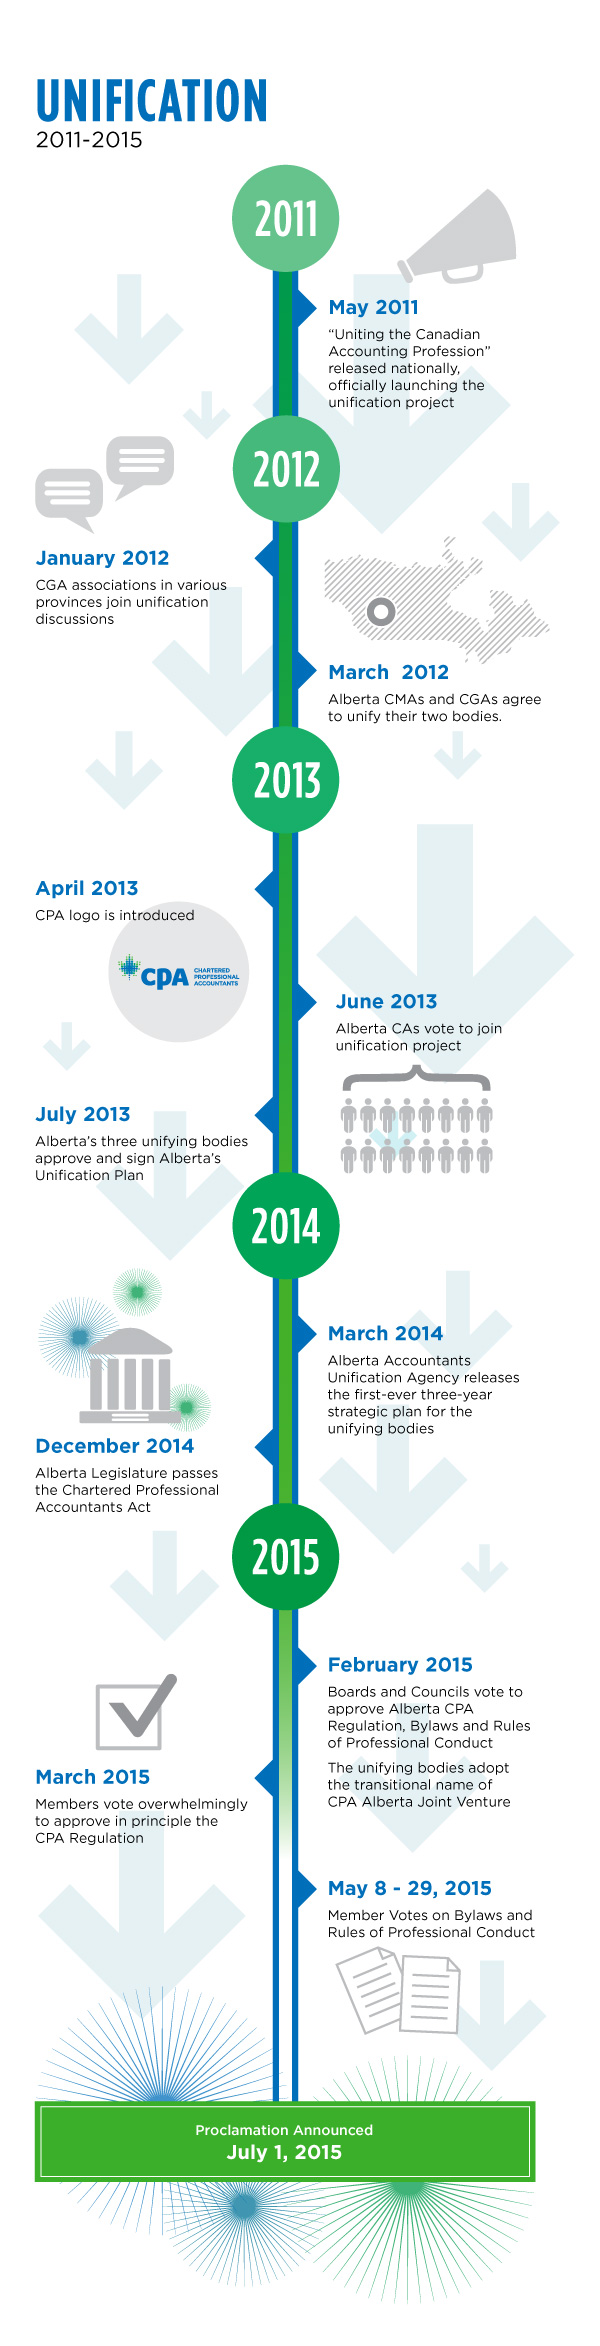 Timeline of CPA unification in 2011 to proclamation announcement on July 1, 2015